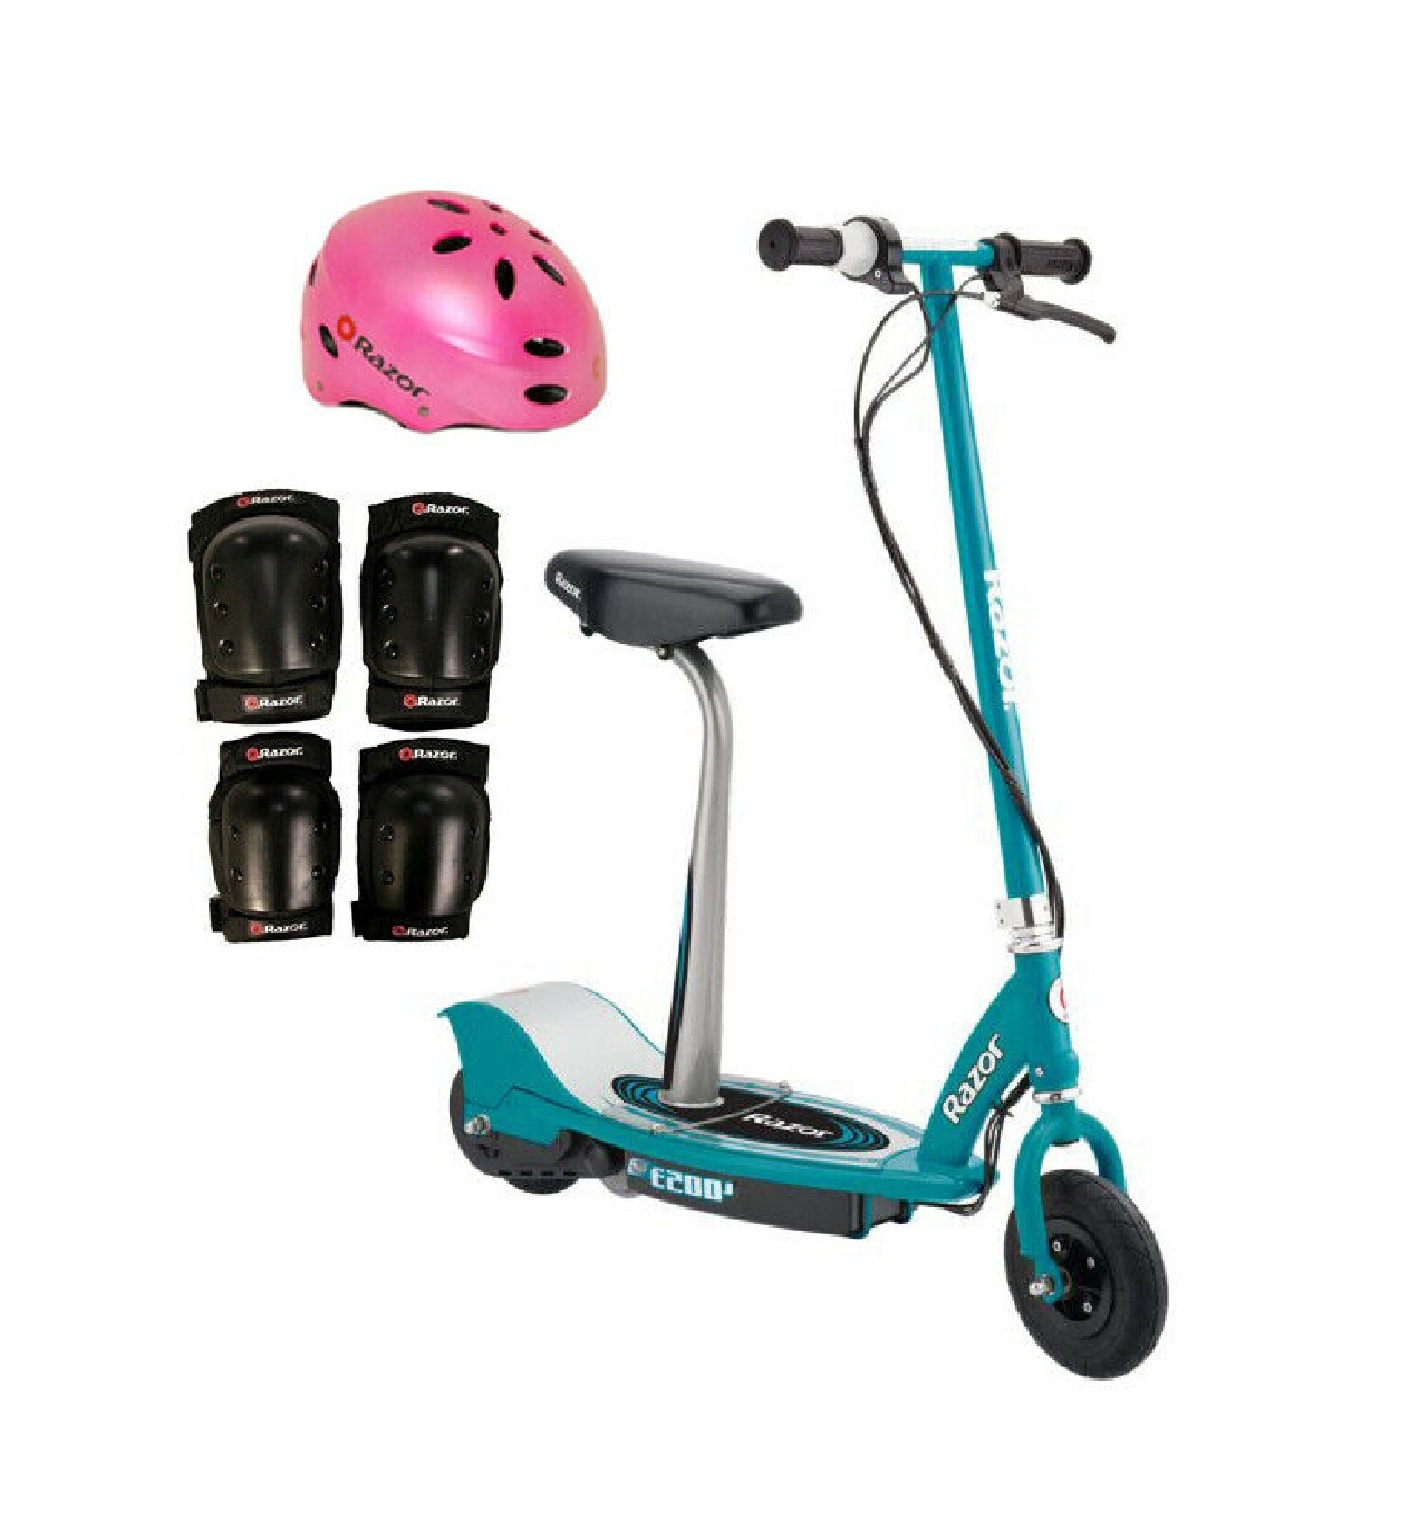 køn Inspektion modnes Razor Razor E200S Seated Kids Electric Motor Toy Scooter with Safety Helmet  and Knee Pads in the Scooters department at Lowes.com